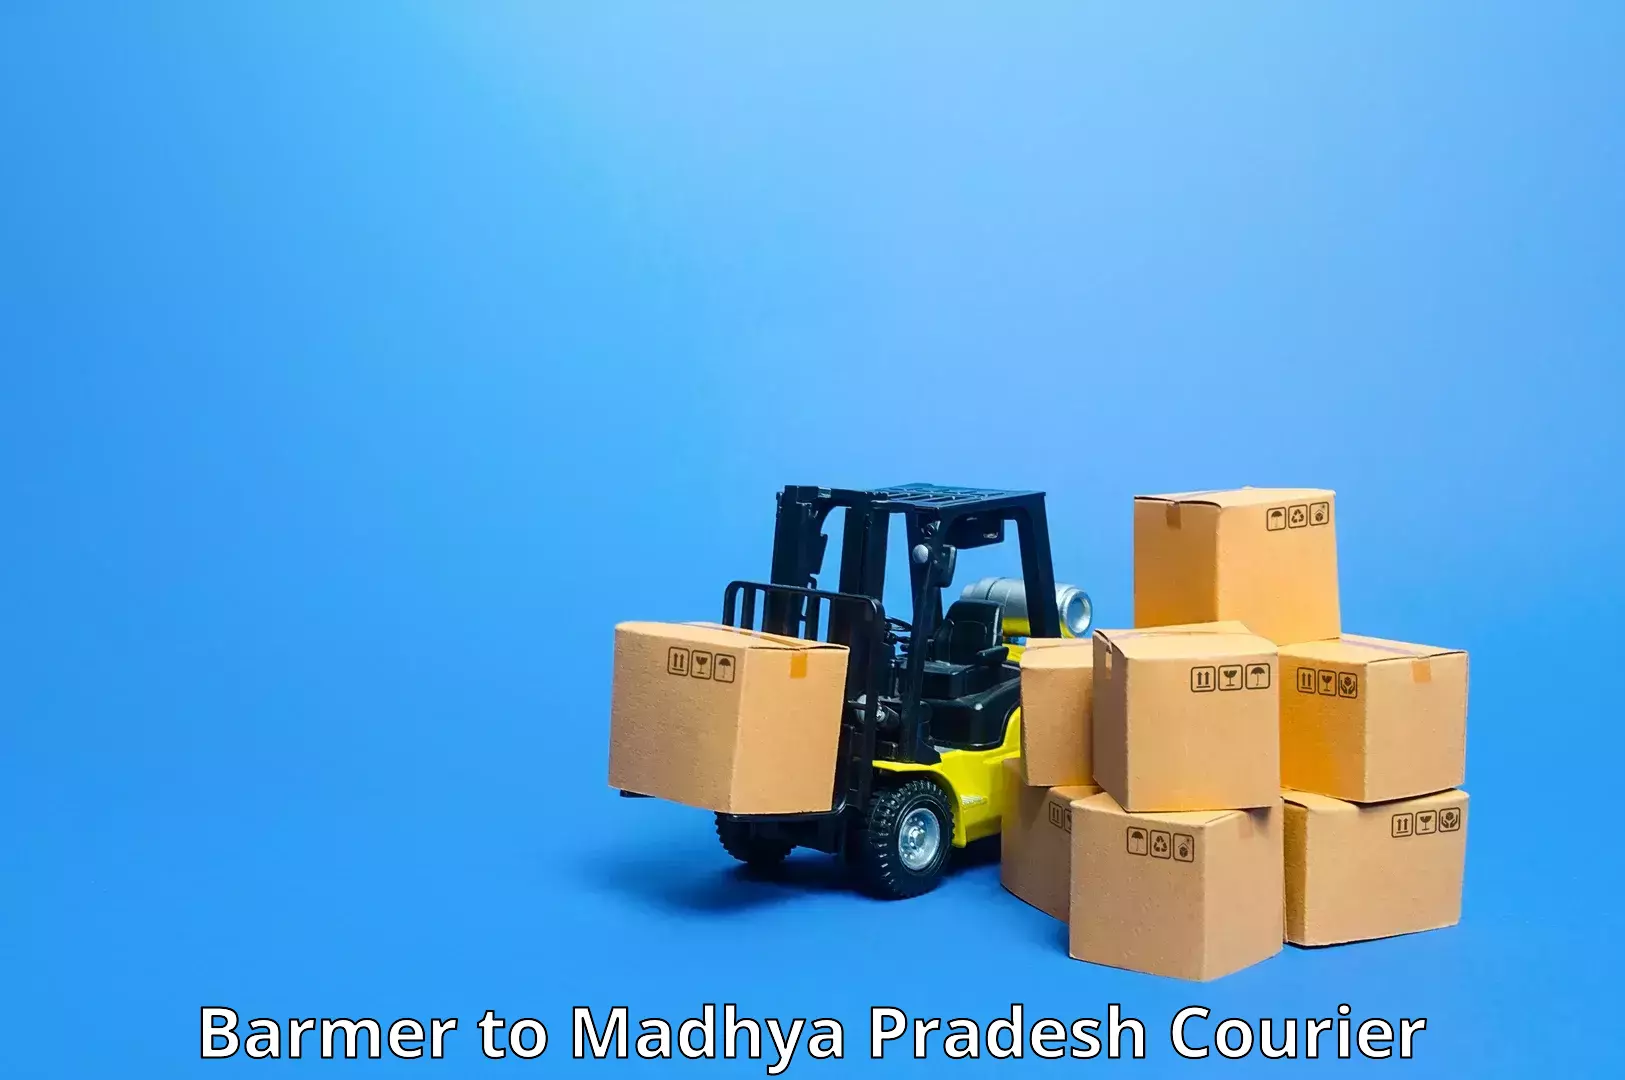 Large package courier Barmer to Madhya Pradesh